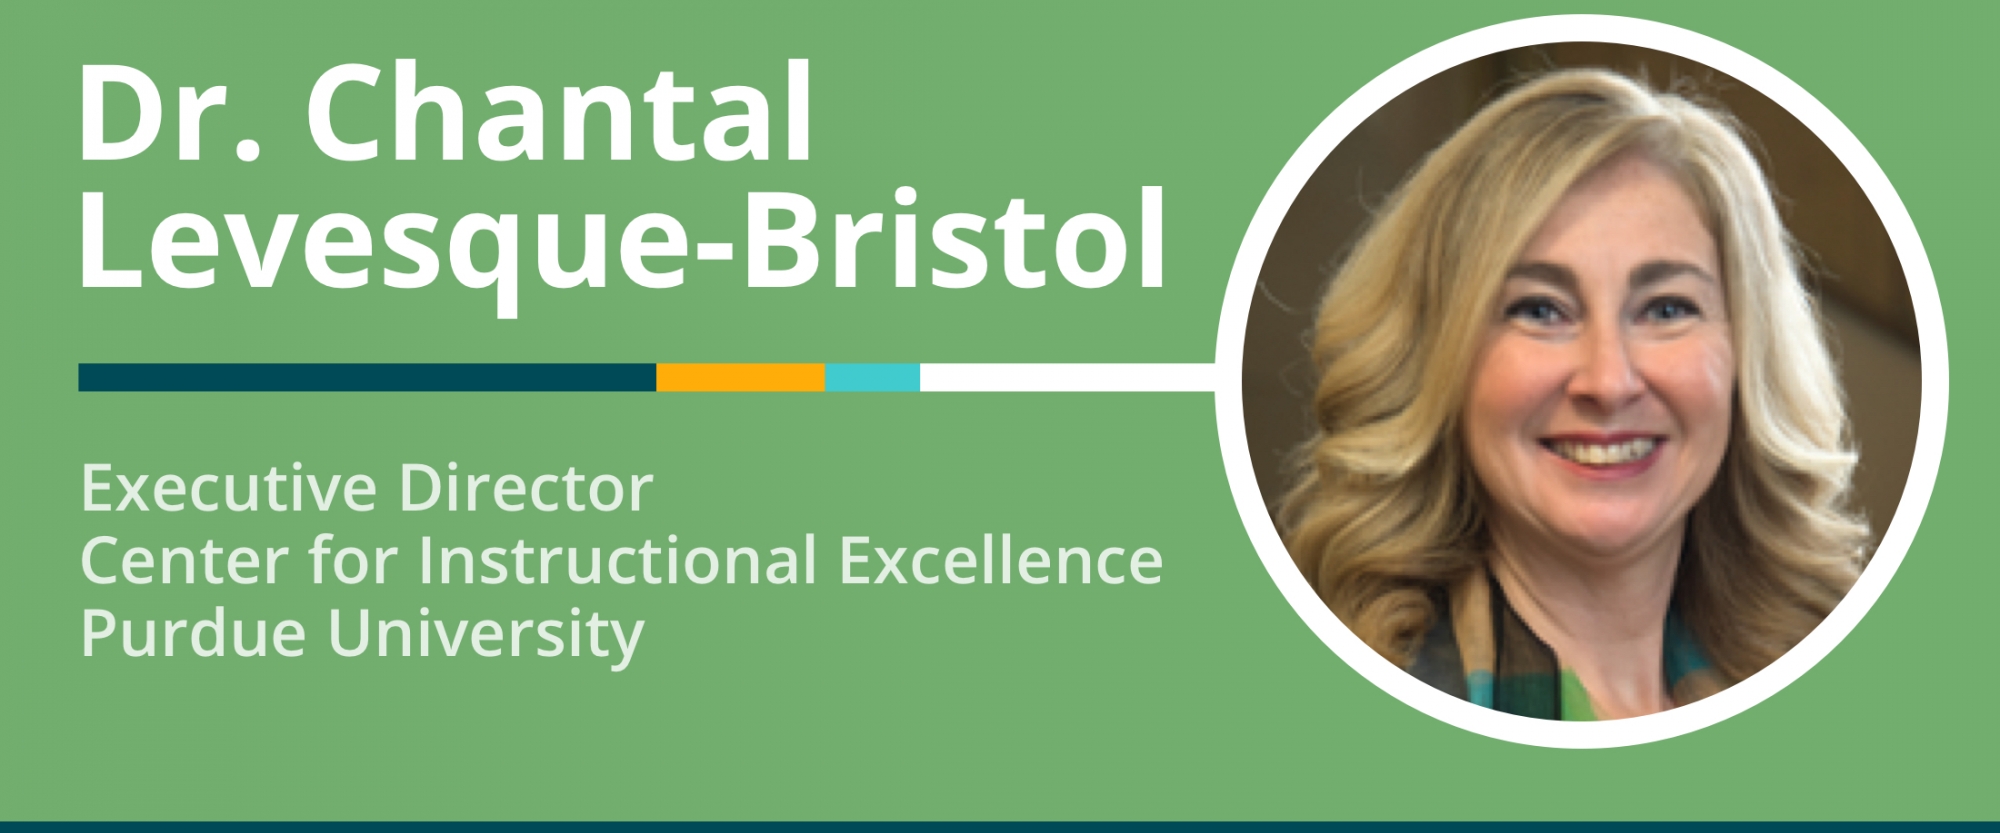 Scholarship to Practice 6/24/21: Transcript of Conversation With Chantal Levesque-Bristol, Executive Director of the Center for Instructional Excellence at Purdue University 